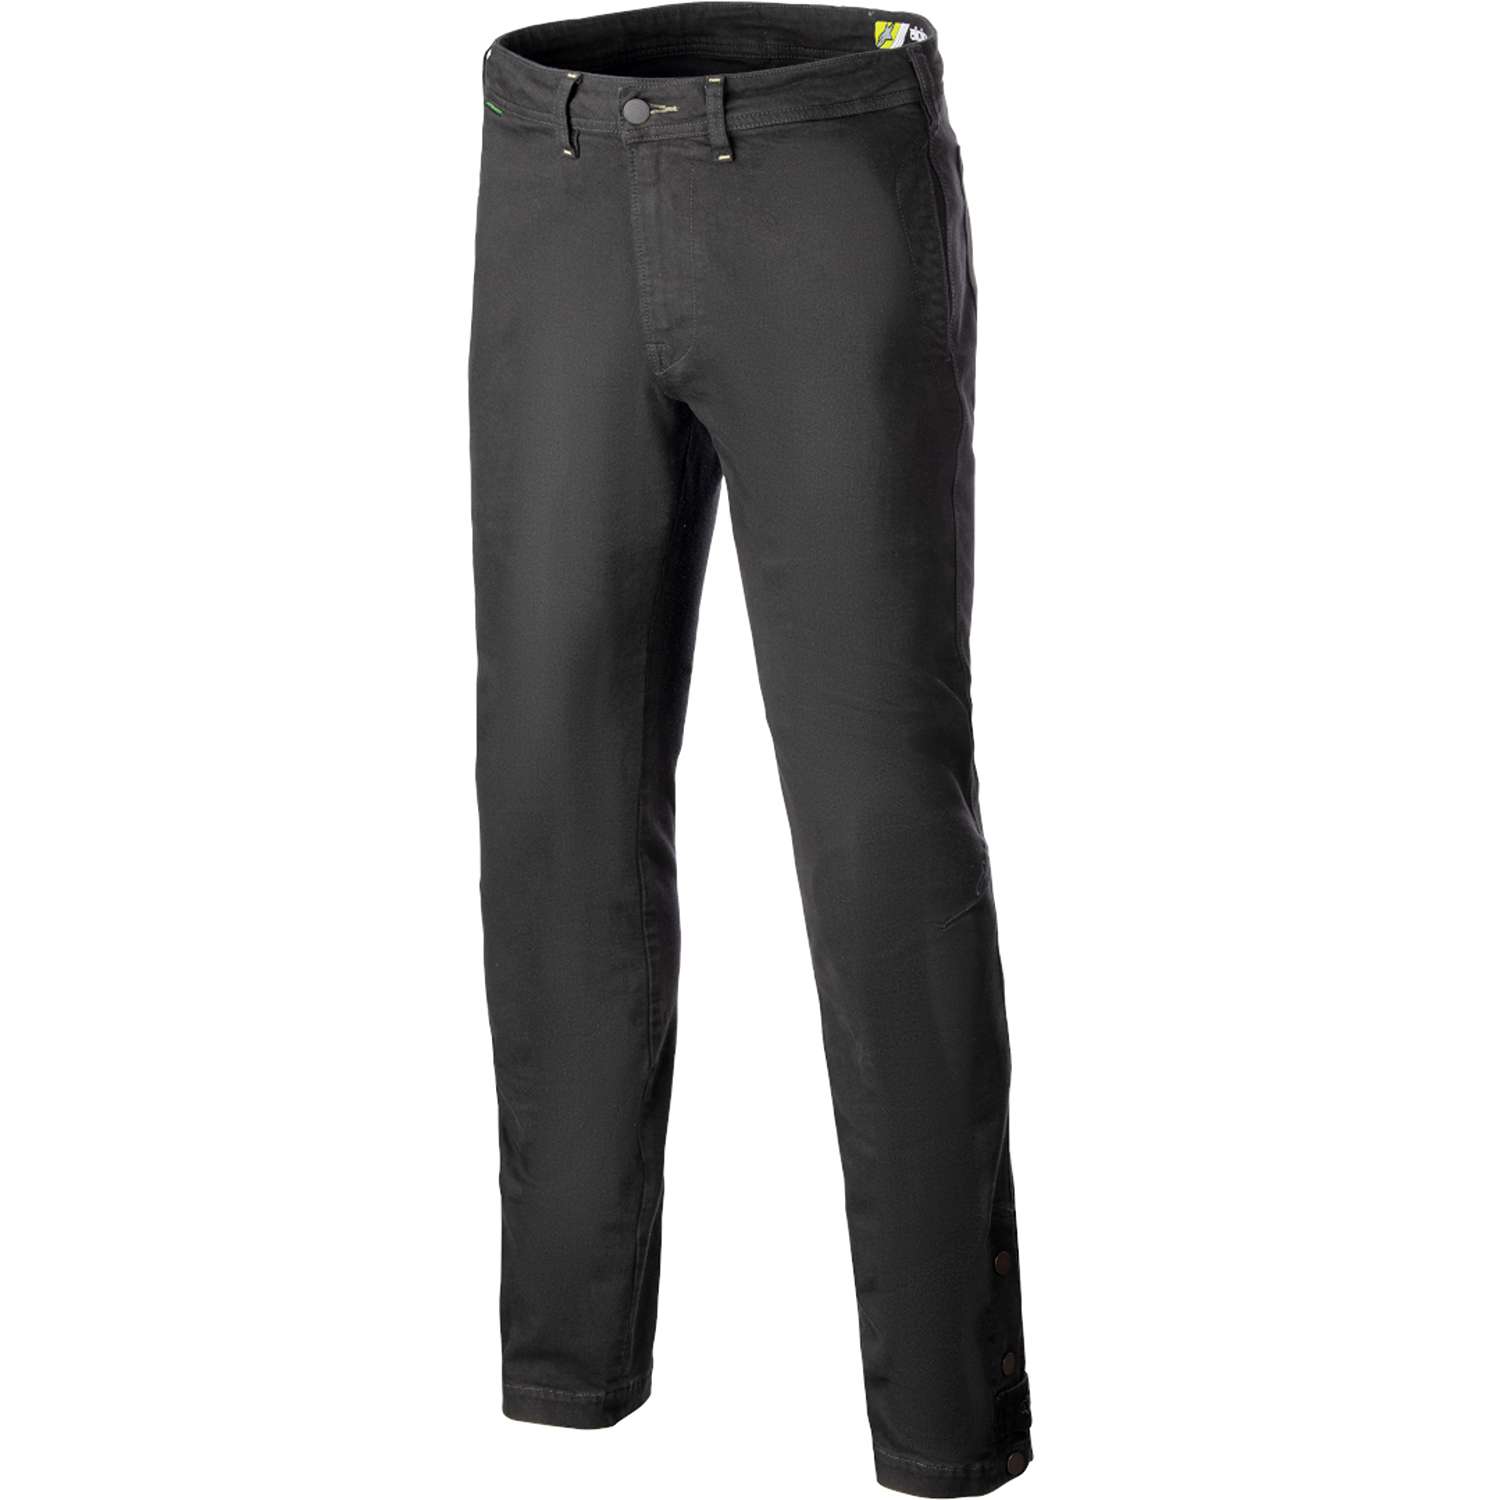 Image of Alpinestars Stratos Regular Fit Tech Riding Pants Anthracite Taille 38